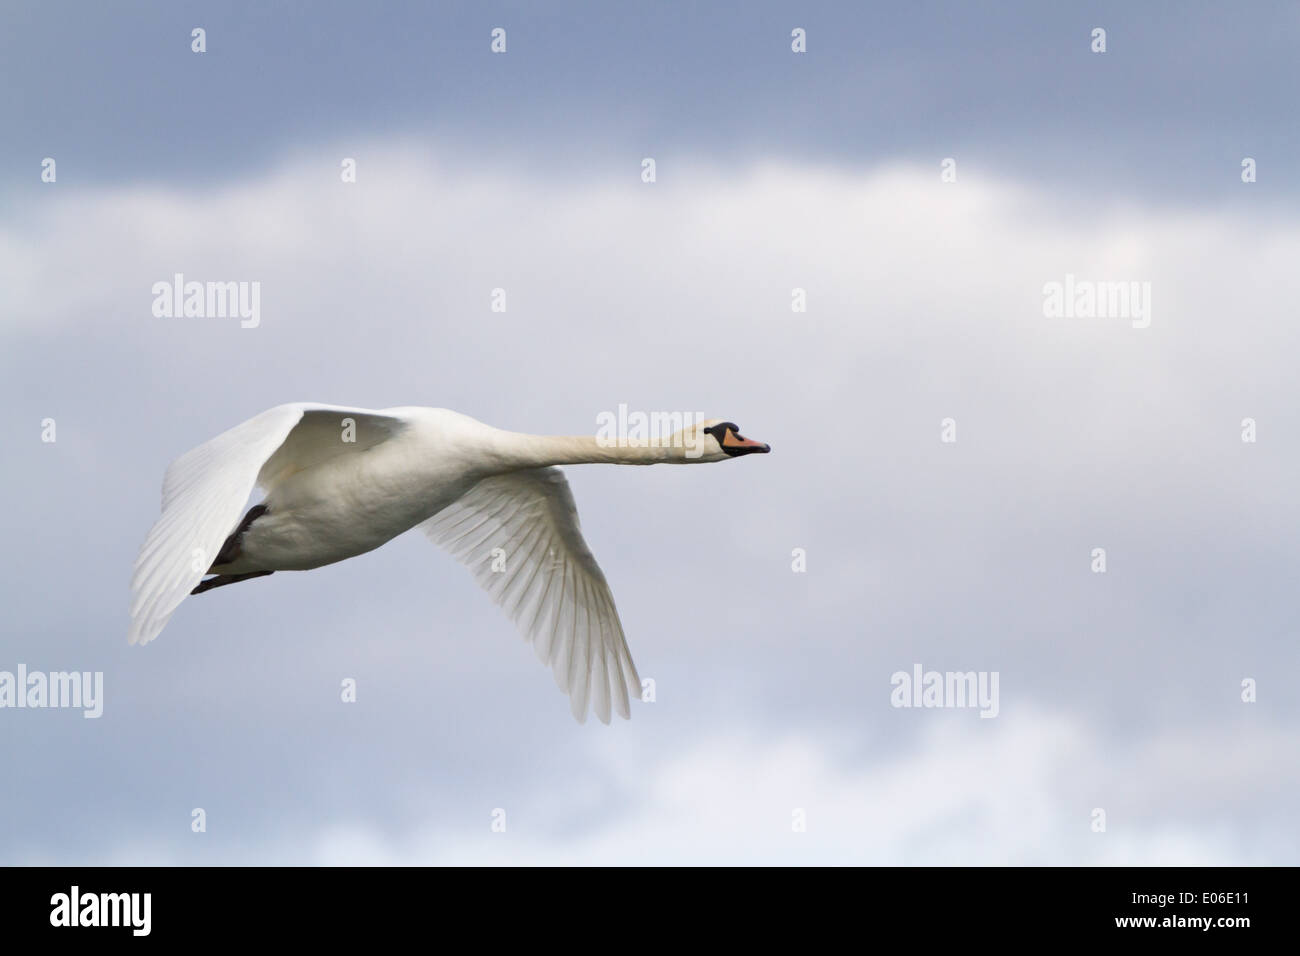 Mute swan (Cygnus olor) flying in front of a cloudy sky Stock Photo